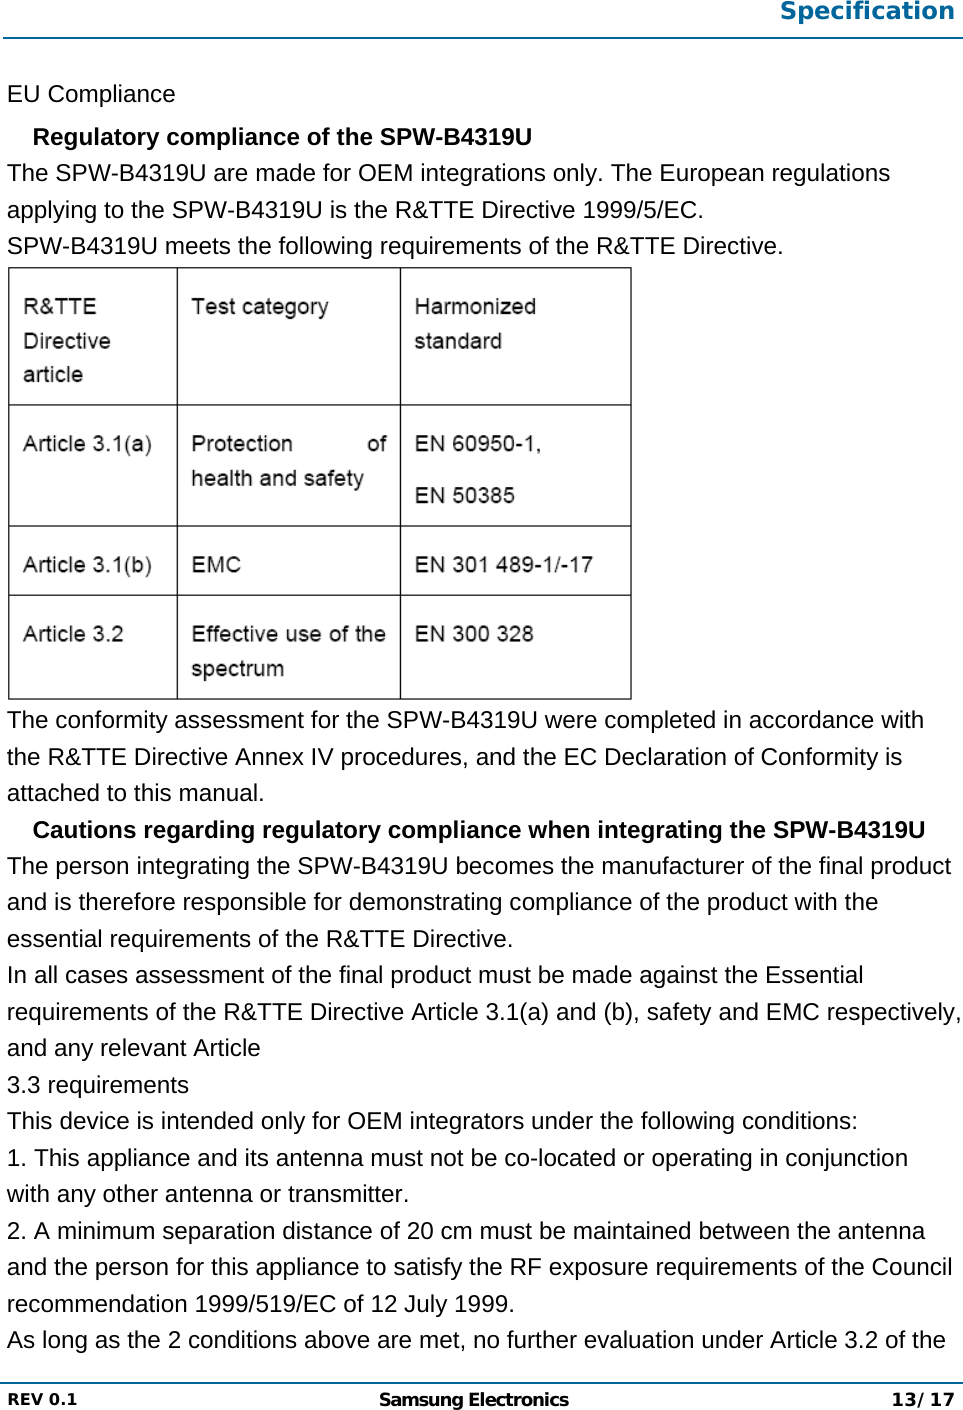  Specification  REV 0.1  Samsung Electronics 13/17  EU Compliance  Regulatory compliance of the SPW-B4319U The SPW-B4319U are made for OEM integrations only. The European regulations applying to the SPW-B4319U is the R&amp;TTE Directive 1999/5/EC. SPW-B4319U meets the following requirements of the R&amp;TTE Directive.  The conformity assessment for the SPW-B4319U were completed in accordance with the R&amp;TTE Directive Annex IV procedures, and the EC Declaration of Conformity is attached to this manual.  Cautions regarding regulatory compliance when integrating the SPW-B4319U The person integrating the SPW-B4319U becomes the manufacturer of the final product and is therefore responsible for demonstrating compliance of the product with the essential requirements of the R&amp;TTE Directive. In all cases assessment of the final product must be made against the Essential requirements of the R&amp;TTE Directive Article 3.1(a) and (b), safety and EMC respectively, and any relevant Article 3.3 requirements This device is intended only for OEM integrators under the following conditions: 1. This appliance and its antenna must not be co-located or operating in conjunction with any other antenna or transmitter. 2. A minimum separation distance of 20 cm must be maintained between the antenna and the person for this appliance to satisfy the RF exposure requirements of the Council recommendation 1999/519/EC of 12 July 1999. As long as the 2 conditions above are met, no further evaluation under Article 3.2 of the 